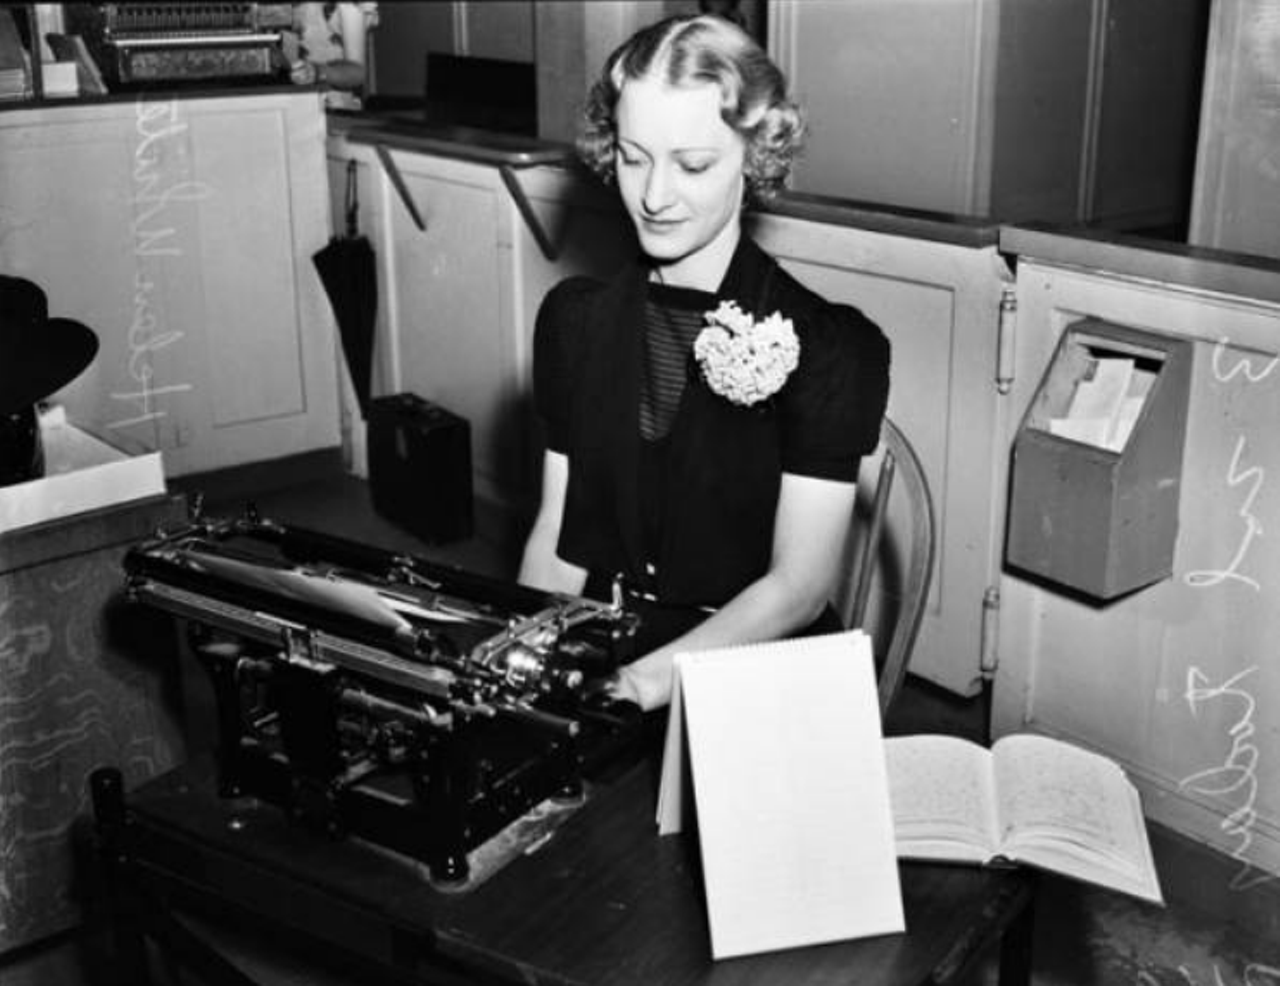 Here you can see Helen White seated as a typewriter while a student at Parrish-Draughon's Business College.